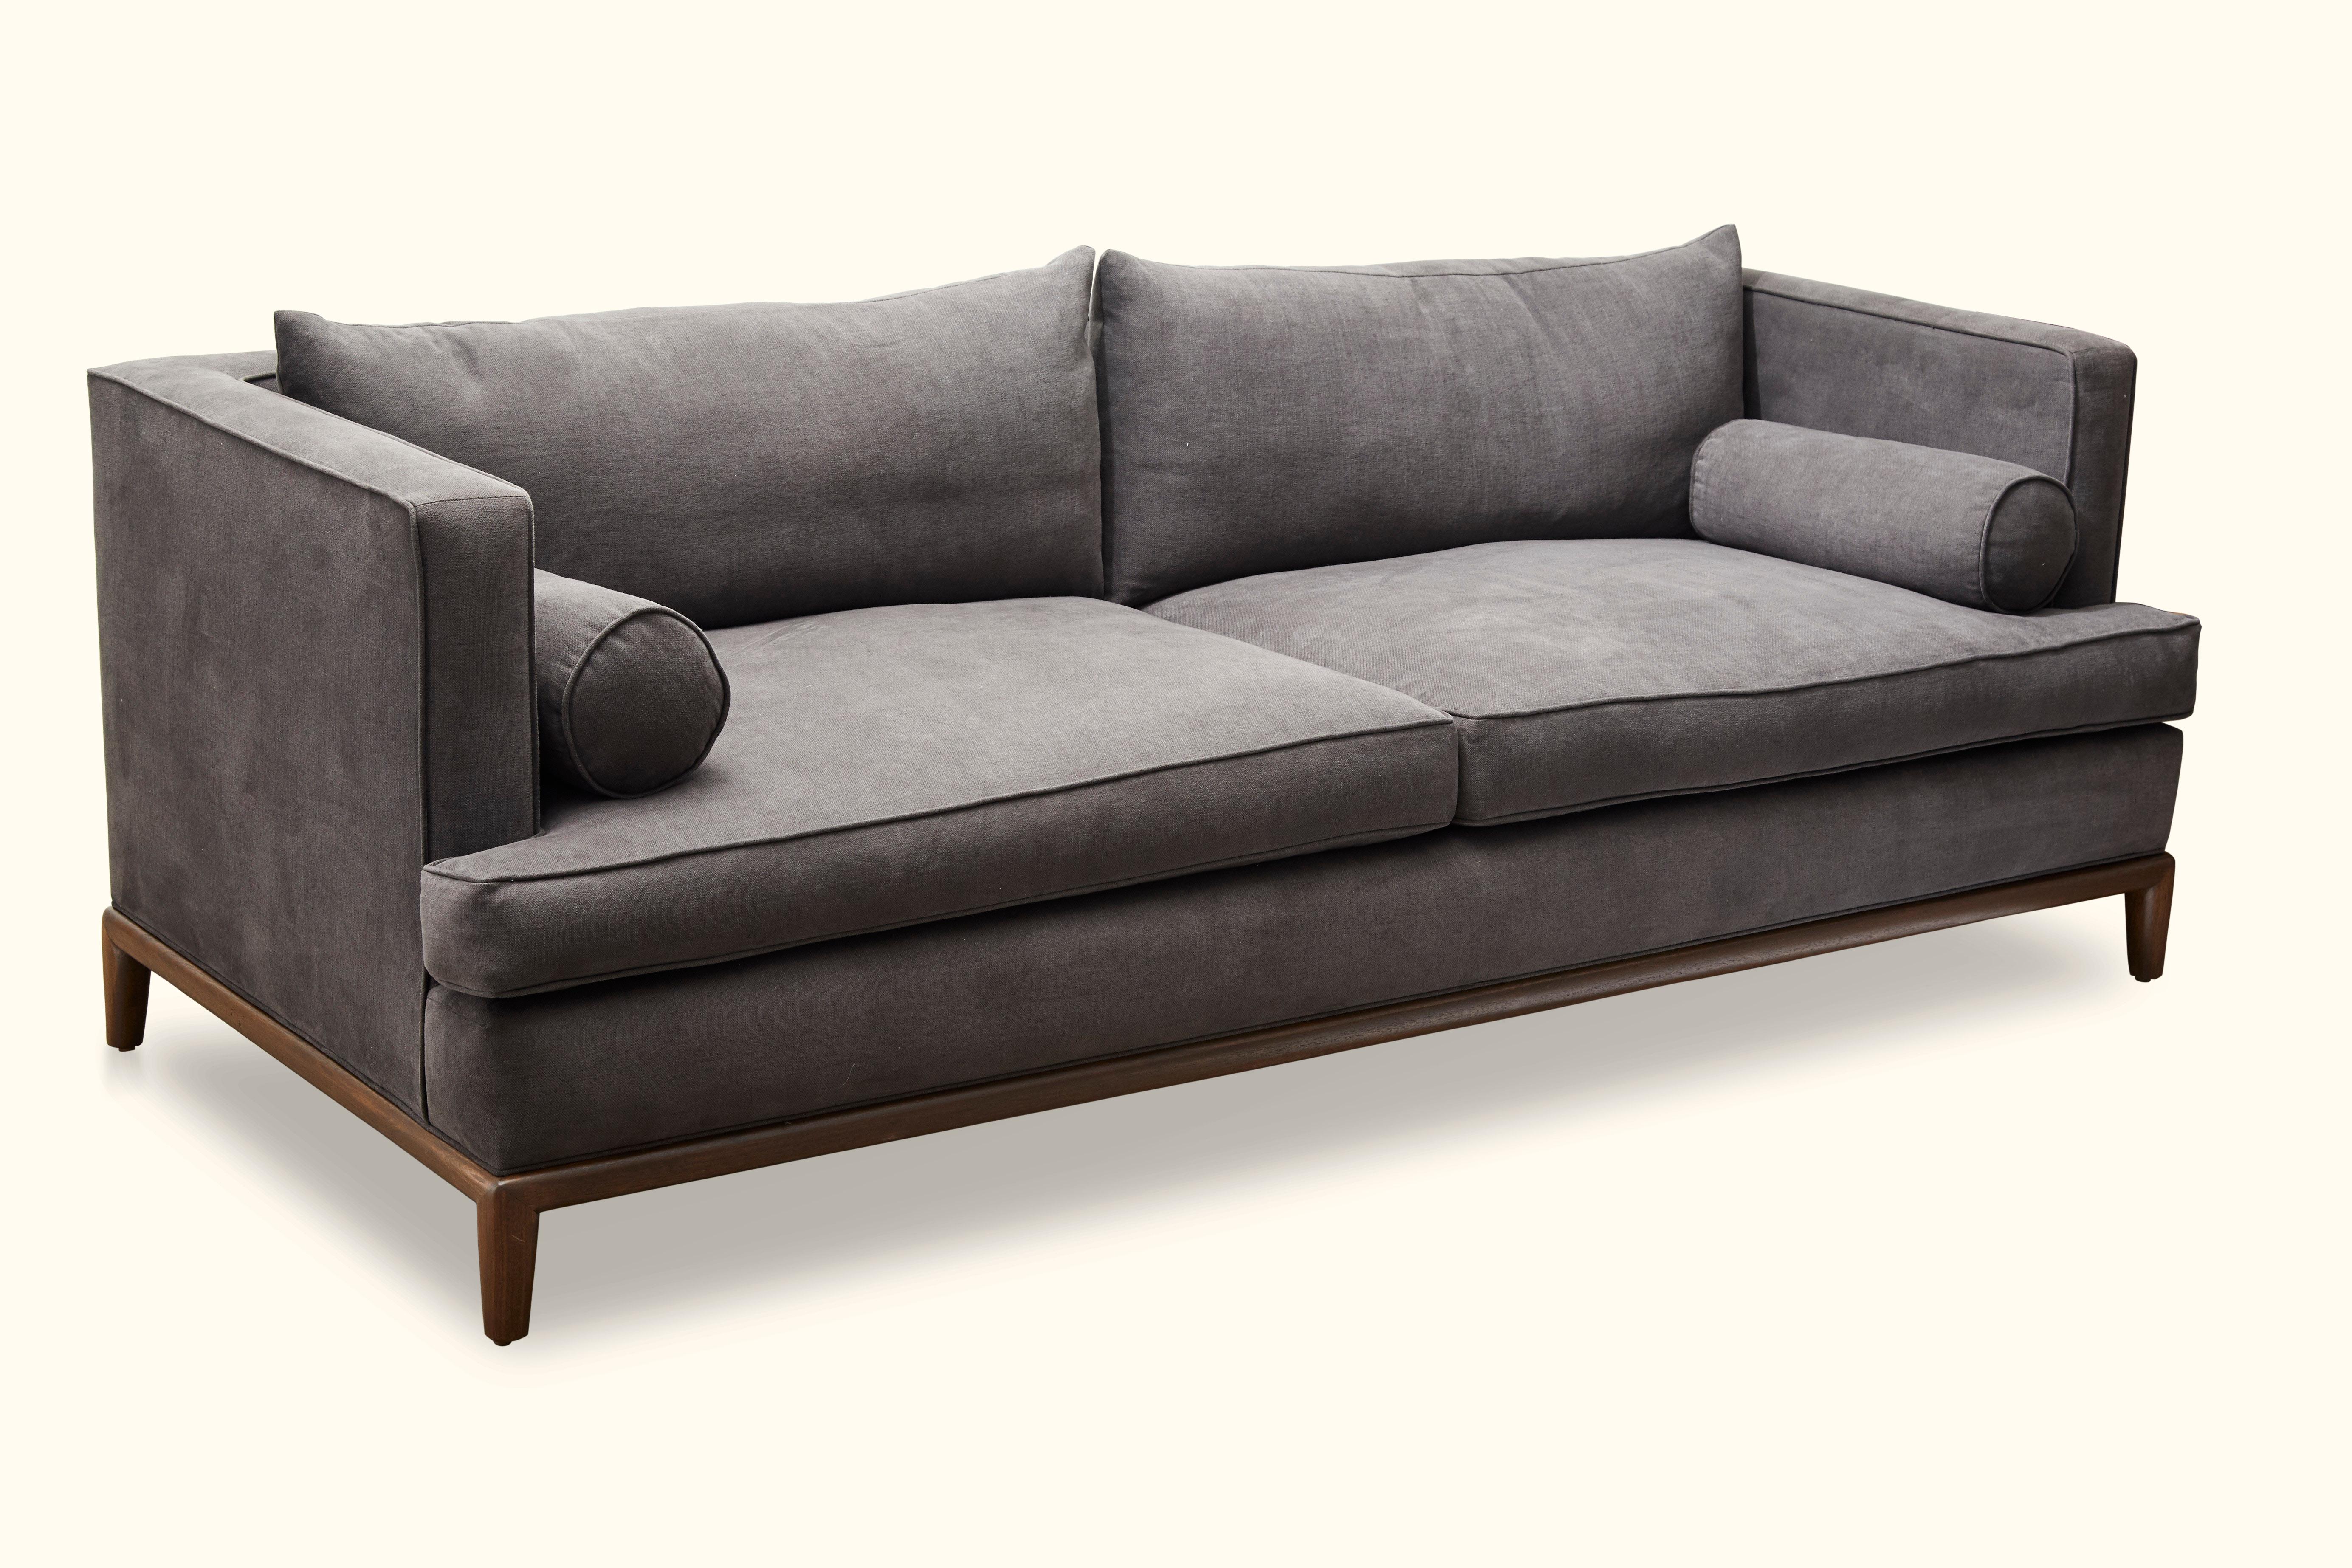 The Franklin sofa is a variation on our Classic Montebello sofa style. It features two down-wrapped seat and back cushions and two bolster pillows. Available finishes and fabric may vary. 

The Lawson-Fenning Collection is designed and handmade in